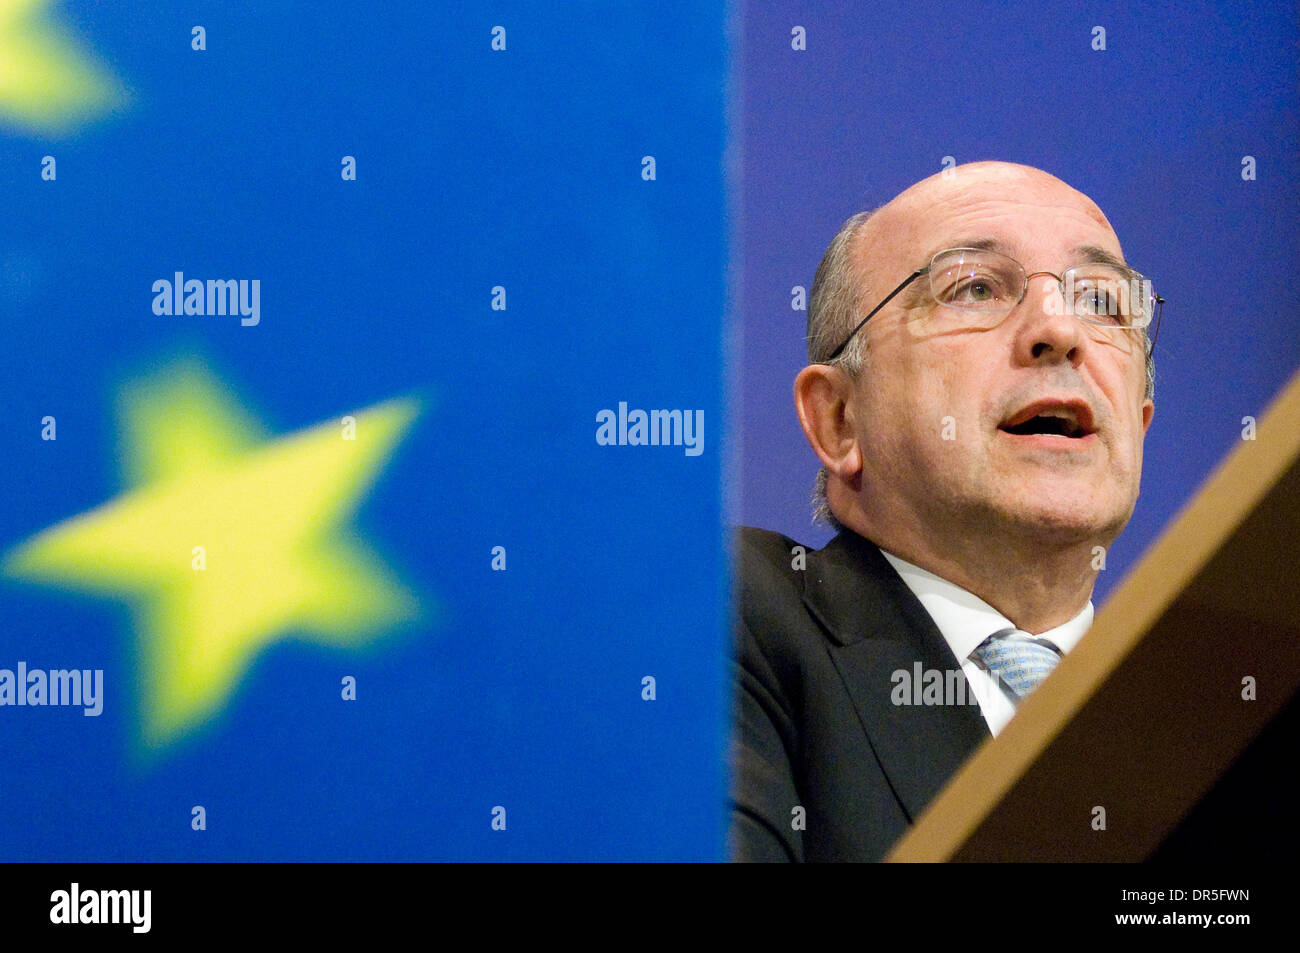 Nov 26, 2008 - Brussels, Belgium - European Monetary Affairs Commissioner, JOAQUIN ALMUNIA talks to the press during a joint press conference on a European Recovery Plan for Growth and Jobs at European Commission headquarters in Brussels, Belgium. (Credit Image: © Wiktor Dabkowski/ZUMA Press) Stock Photo